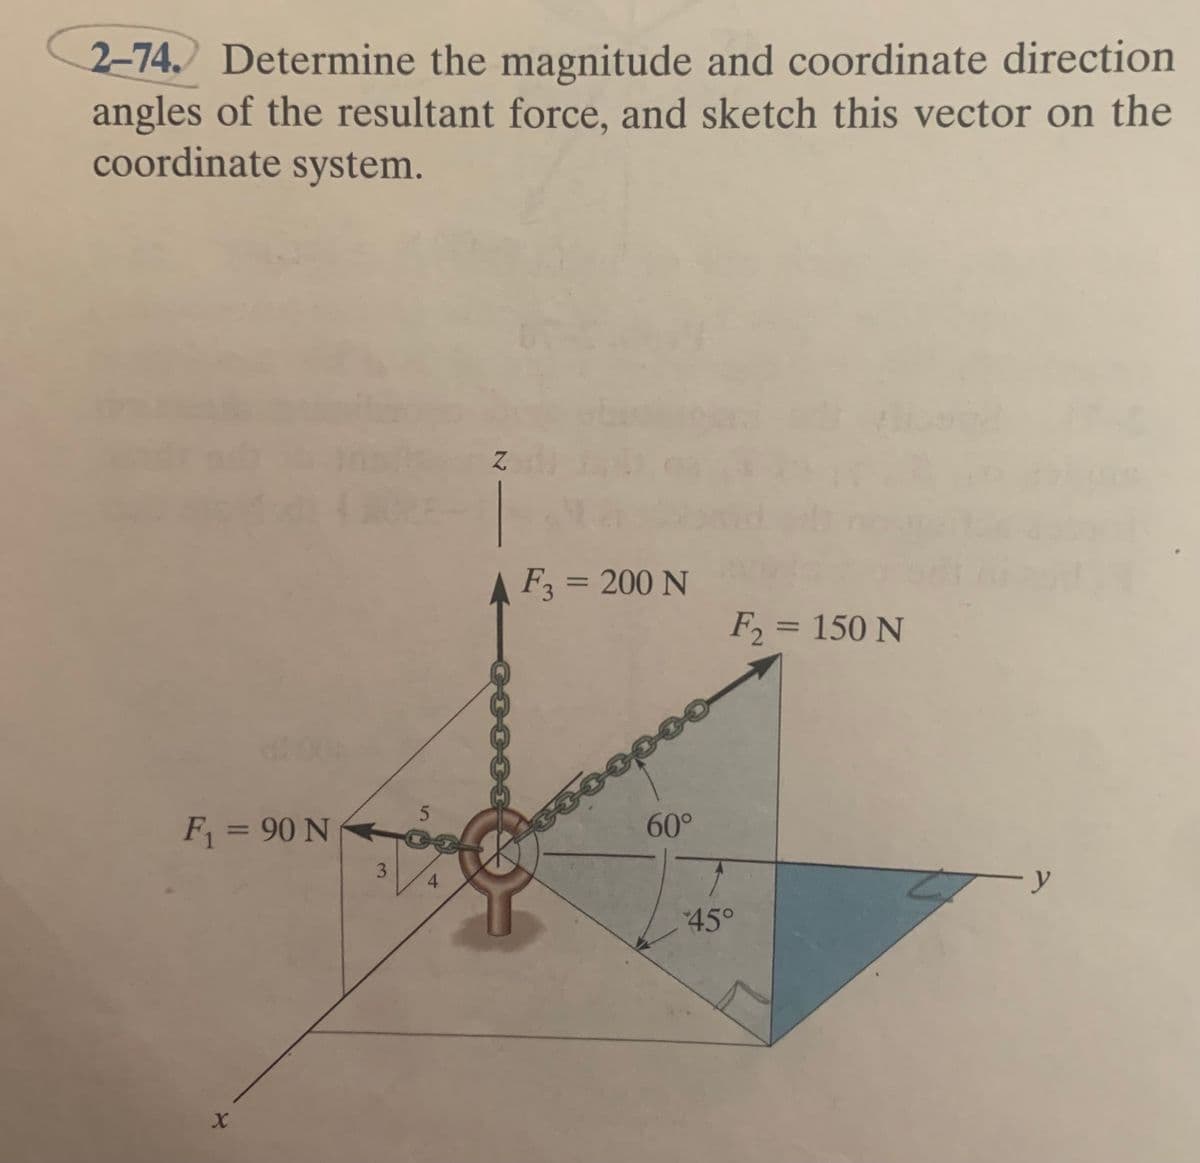 2-74. Determine the magnitude and coordinate direction
angles of the resultant force, and sketch this vector on the
coordinate system.
F = 200 N
%3D
F2 = 150 N
%3D
F = 90 N
60°
%3D
3
-y
45°
